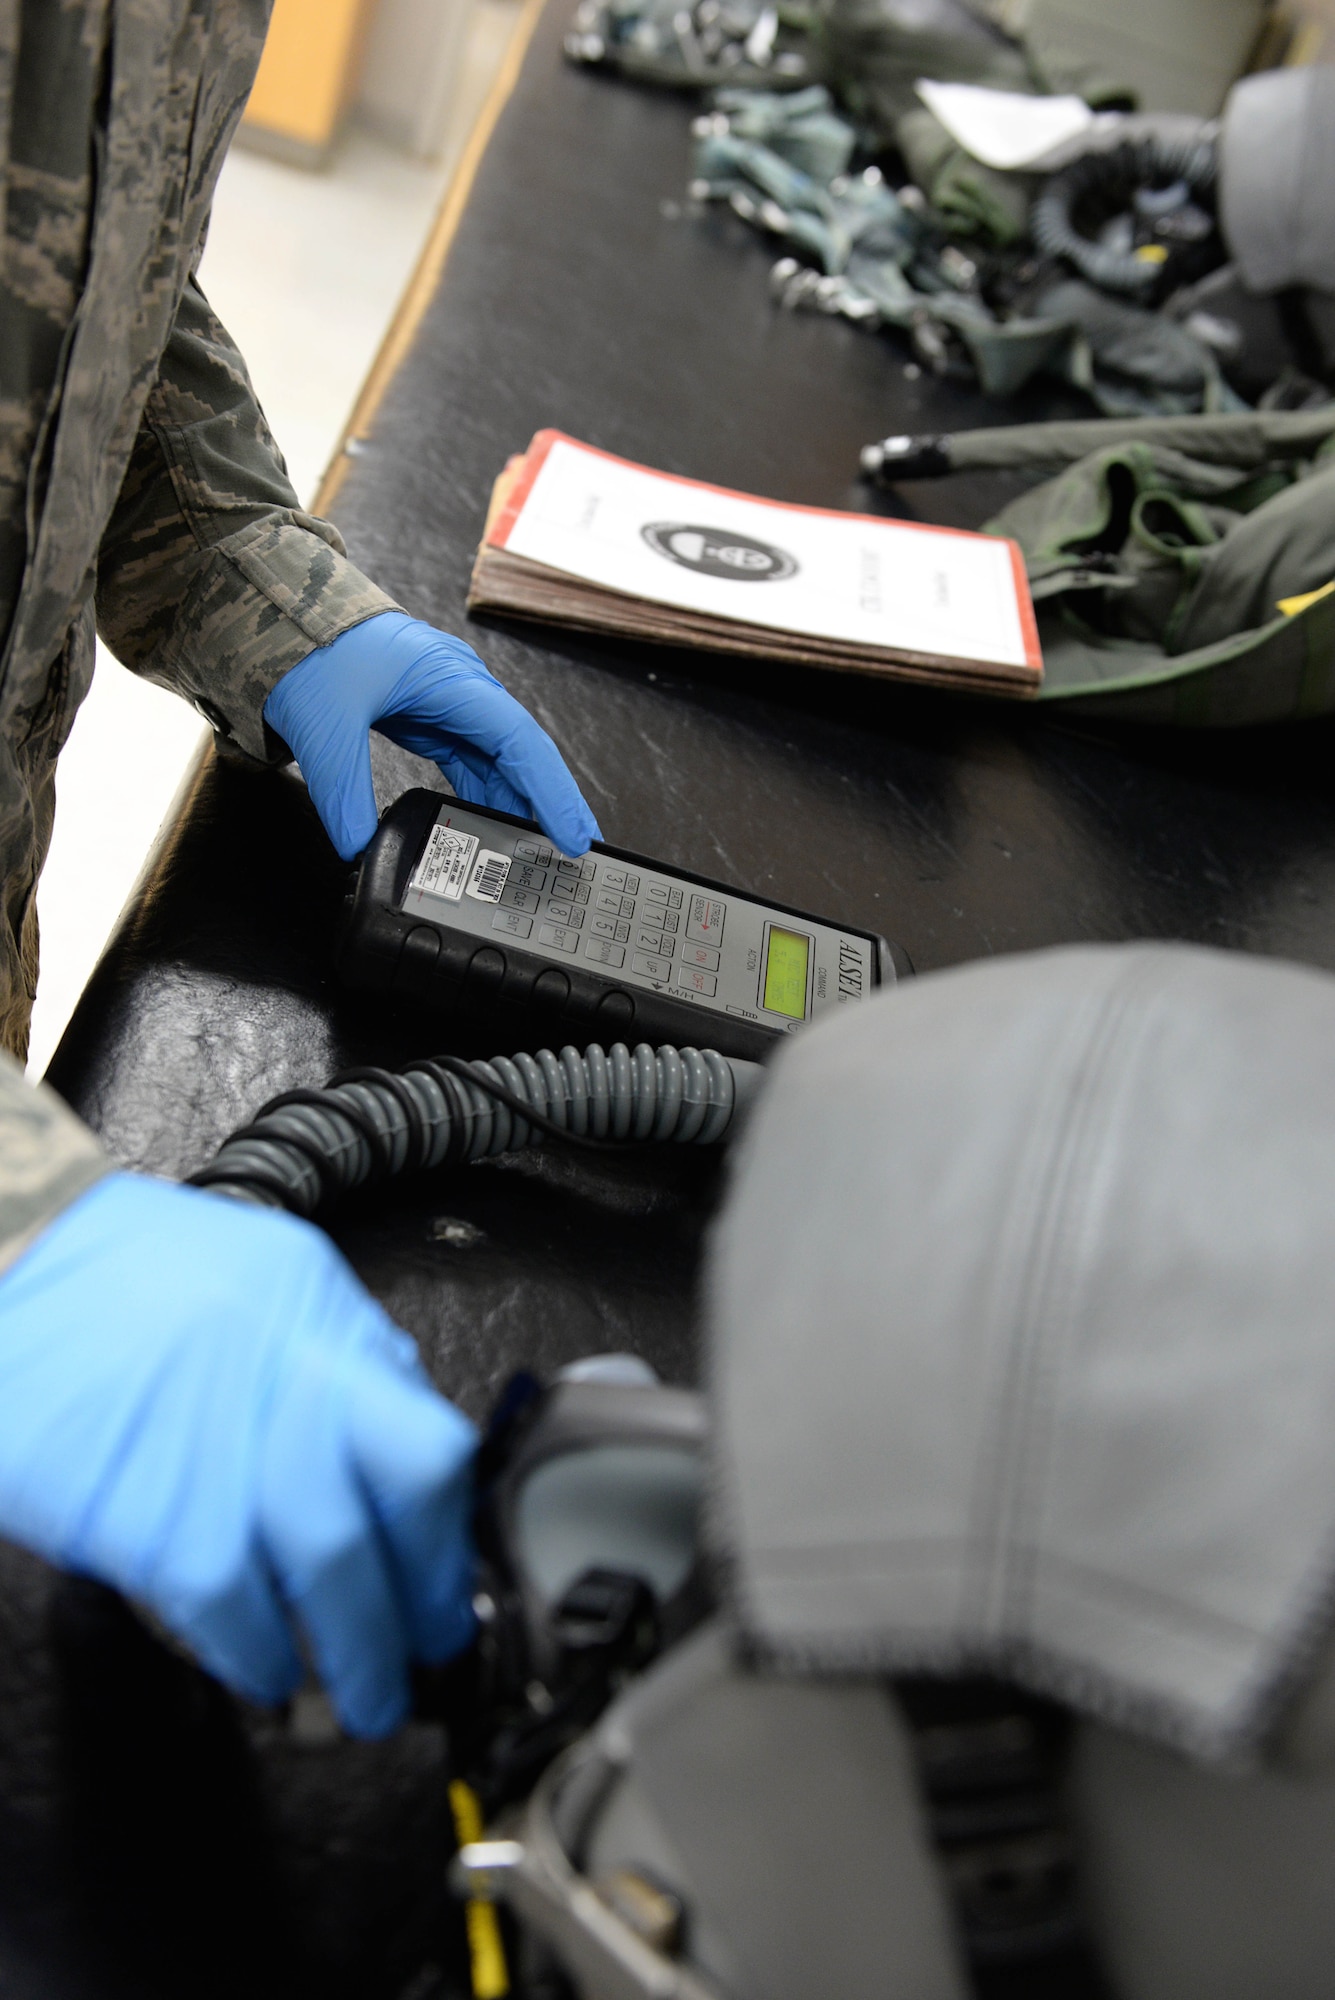 Staff Sgt. Marcus Tello, 41st and 37th Flying Training Squadron Aircrew Flight Equipment technician, checks the airflow of a helmet’s tube Dec. 5, 2017, on Columbus Air Force Base, Mississippi. If any equipment needs repaired, the AFE unit will test, evaluate and replace or fix the issue so pilots are ready to encounter any situation during their flights. (U.S. Air Force photo by Airman 1st Class Keith Holcomb)